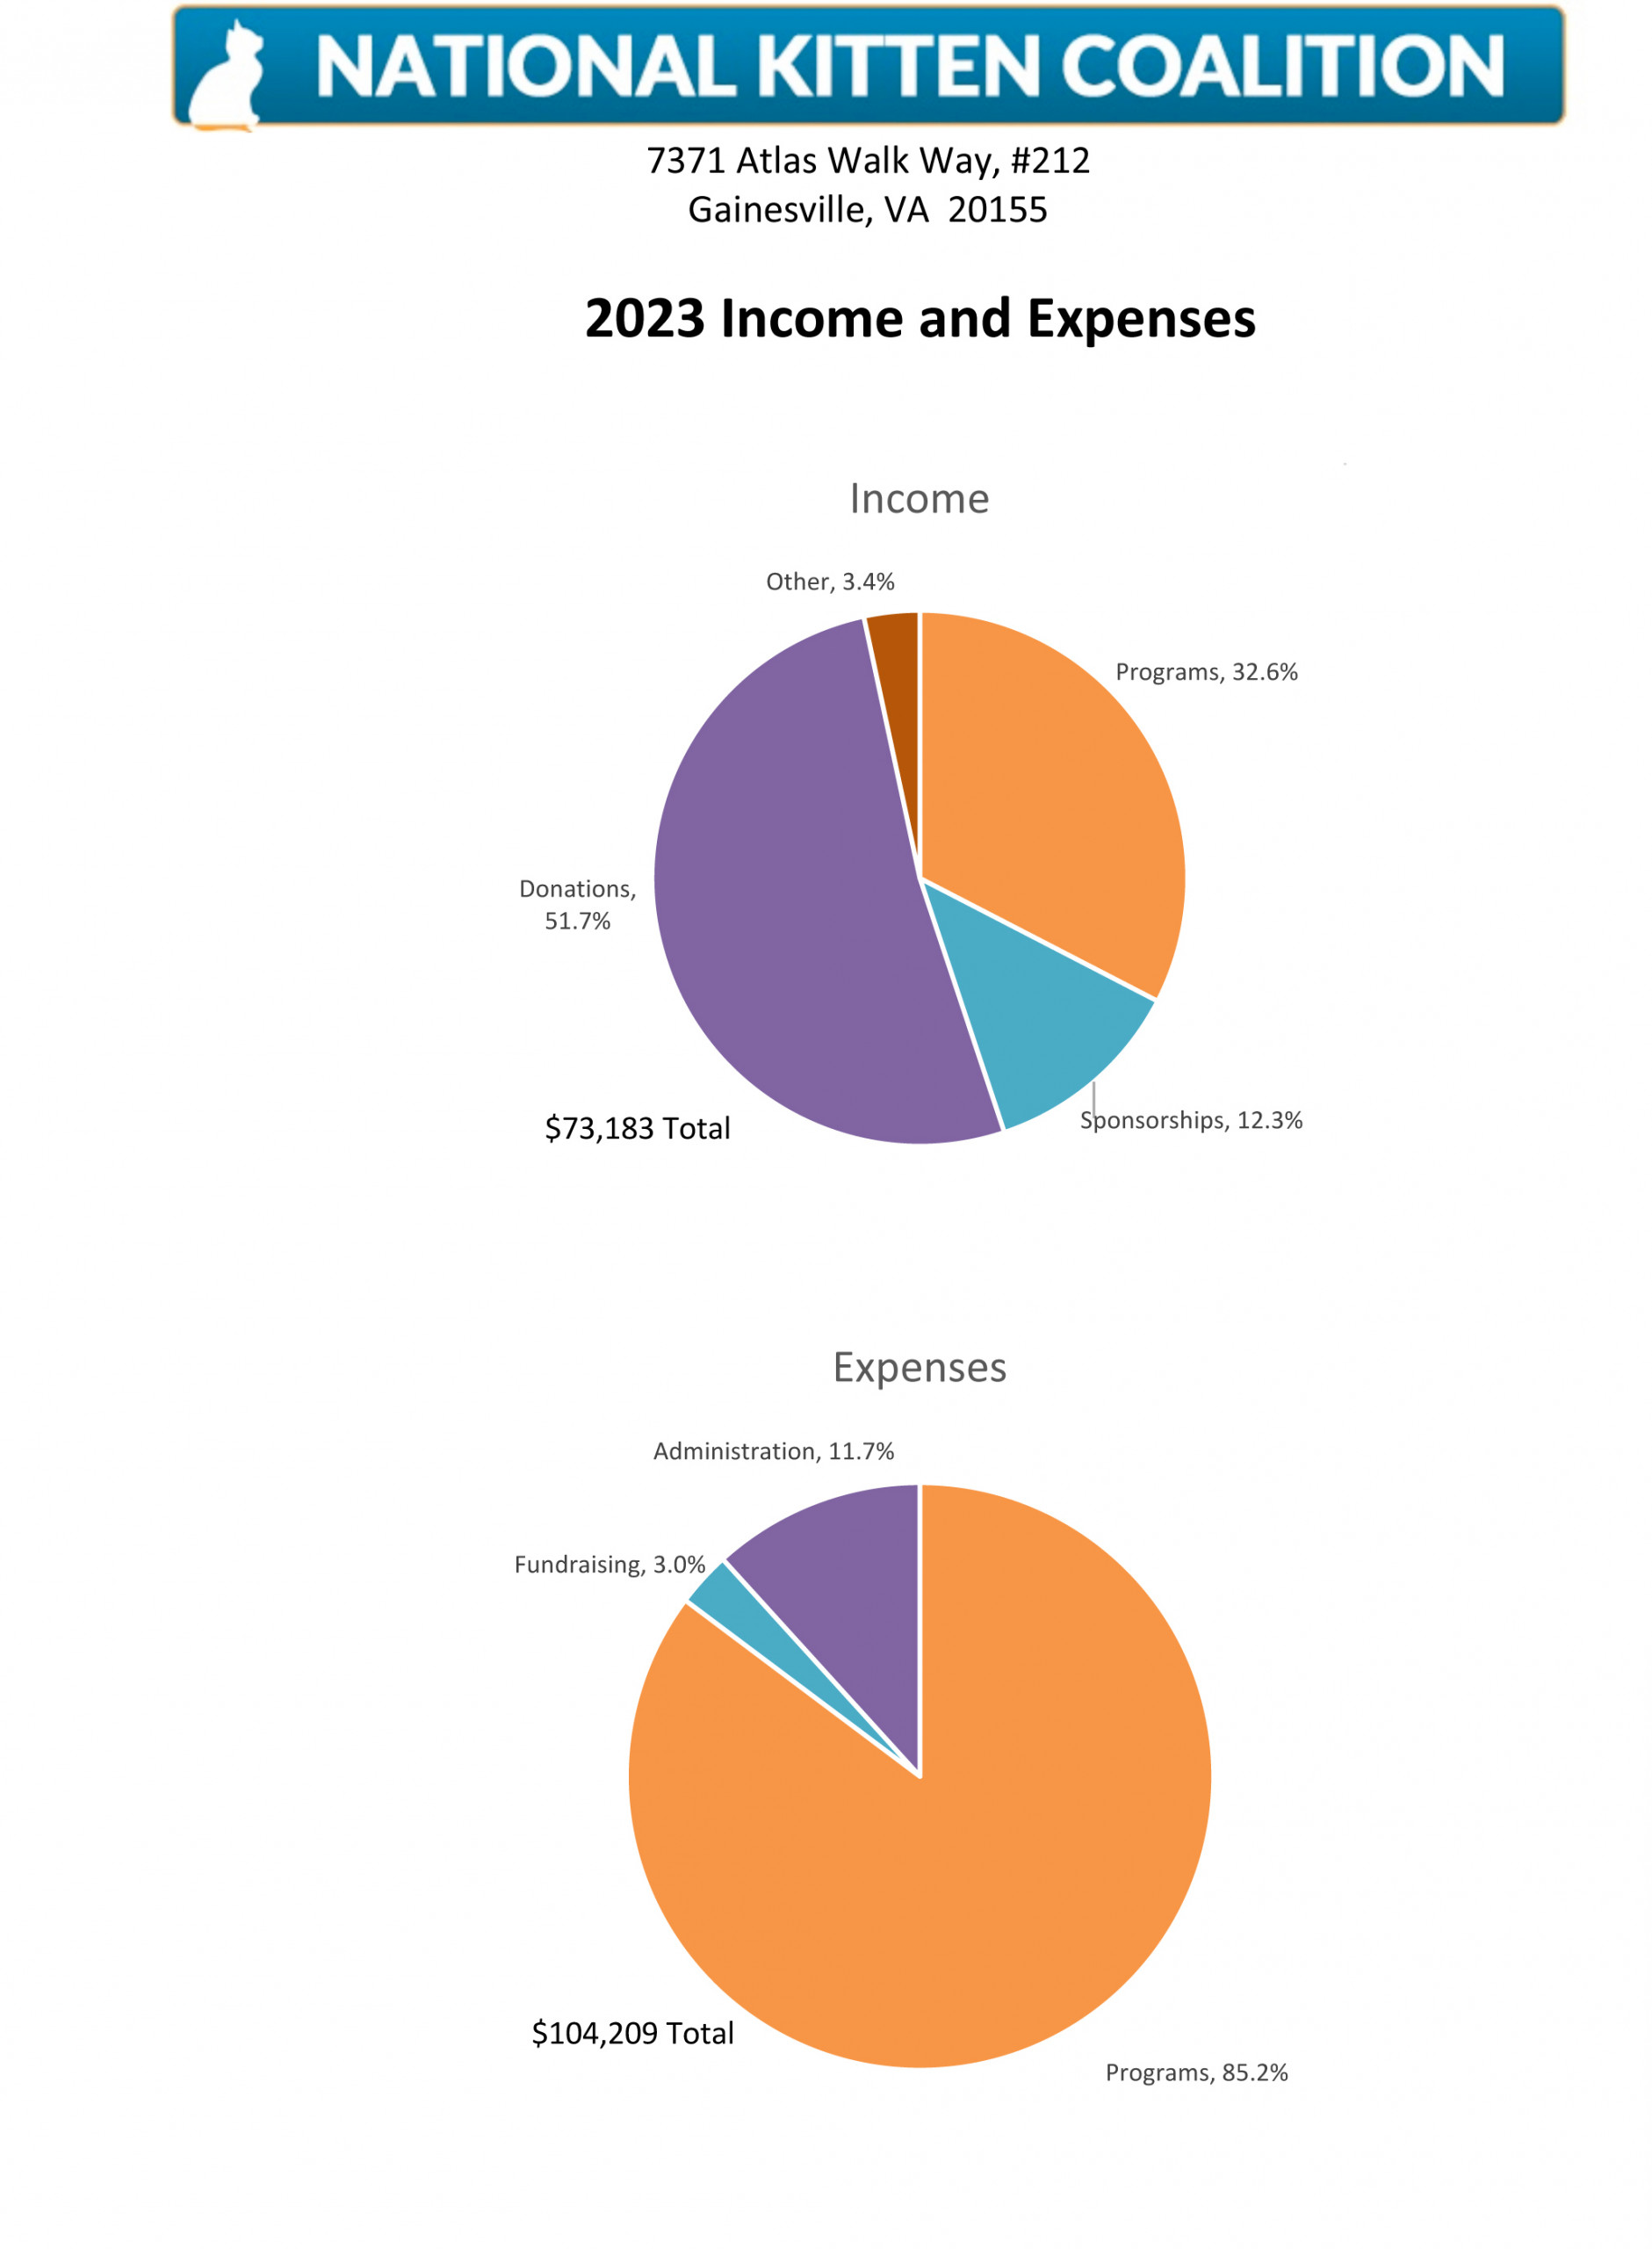 2020 NKC Income and Expenses graphic